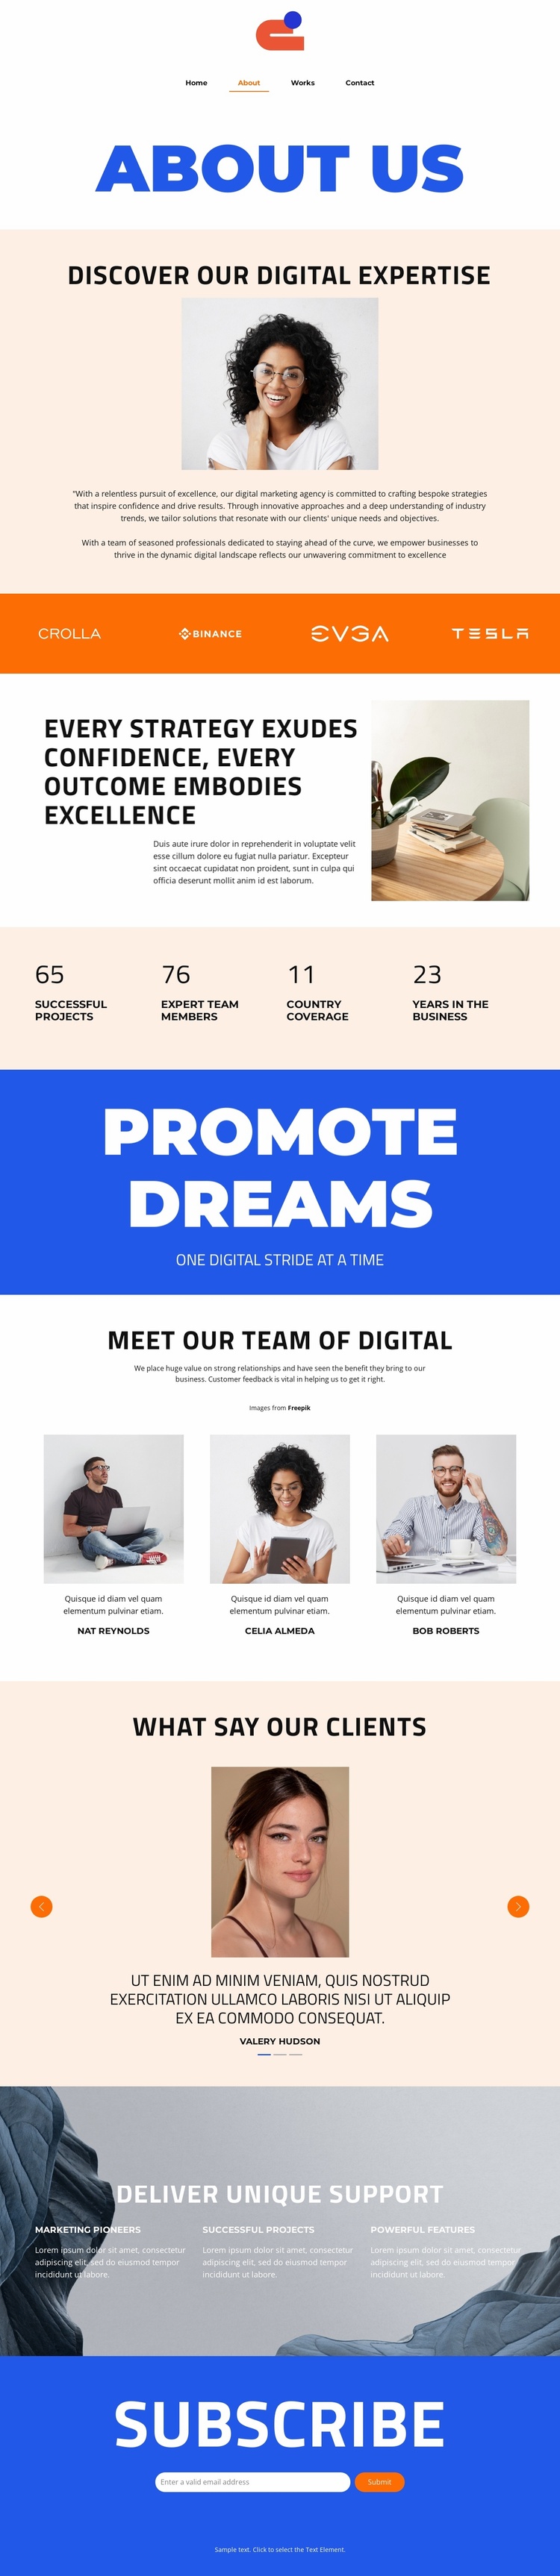 One digital stride at a time Landing Page